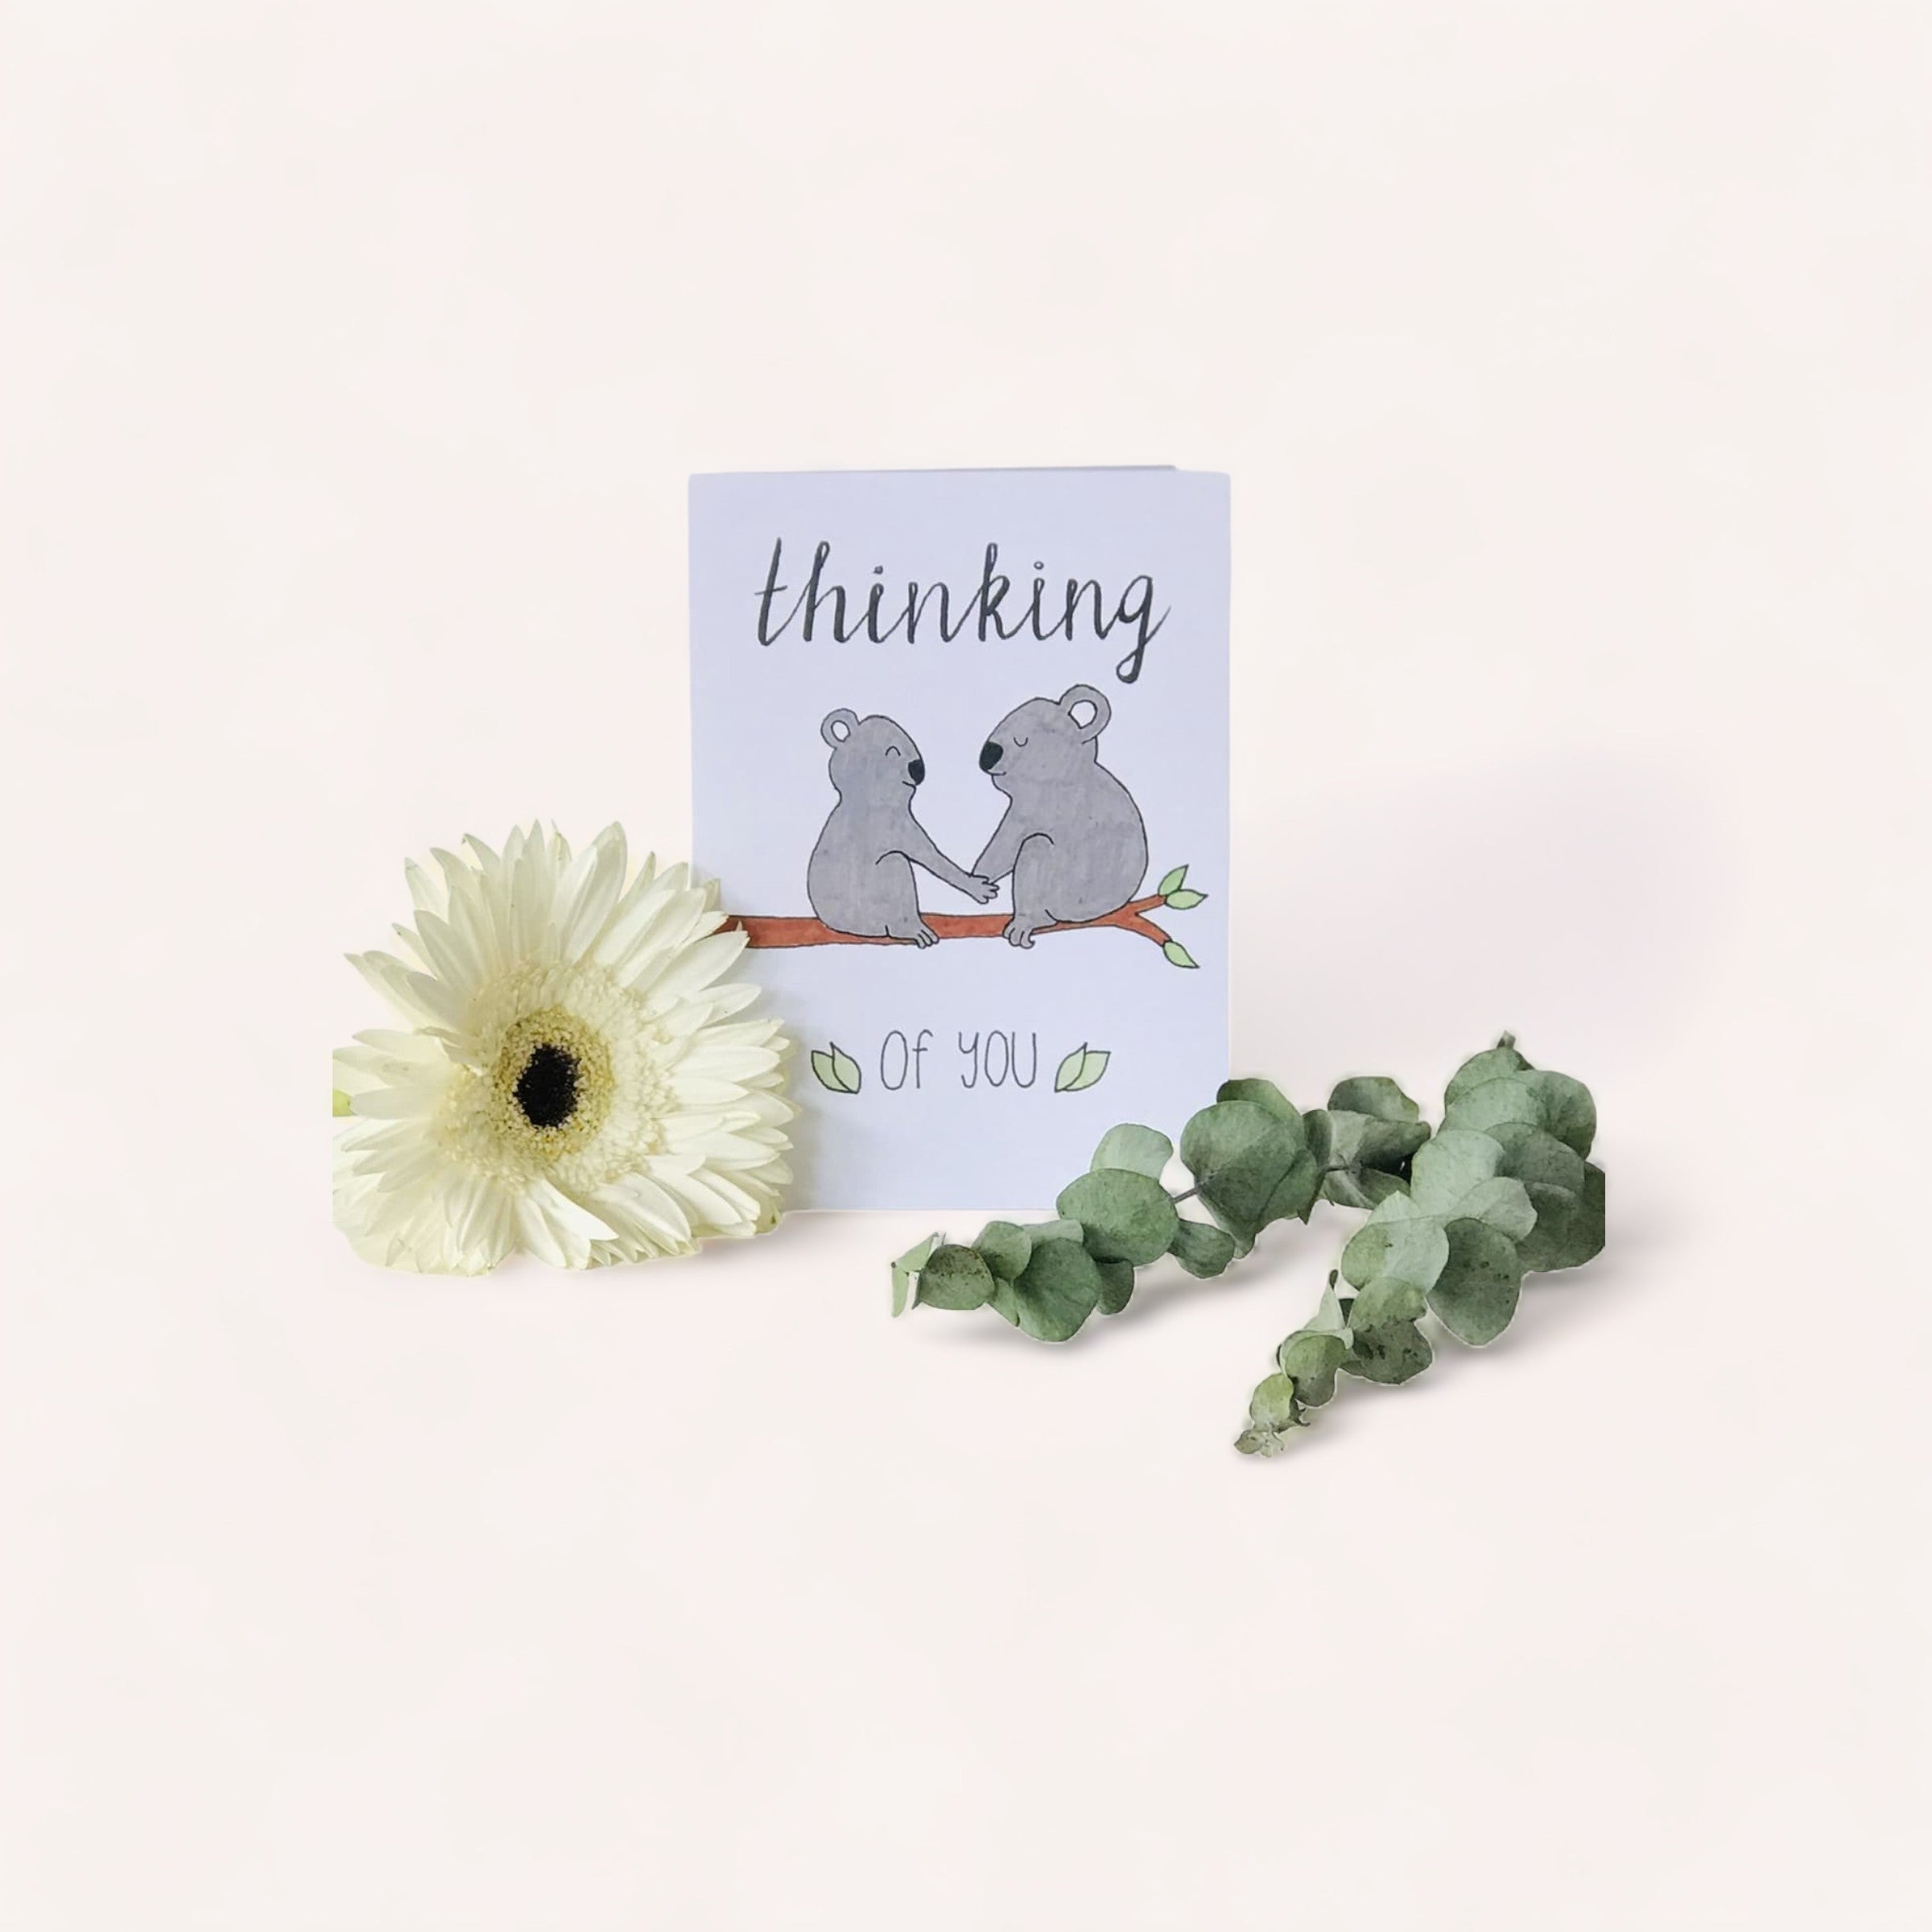 A heartfelt Koala Sympathy Card from Sweet Pea Creations featuring two adorable illustrated koalas with the words "thinking of you," accompanied by a fresh white gerbera daisy and a sprig.